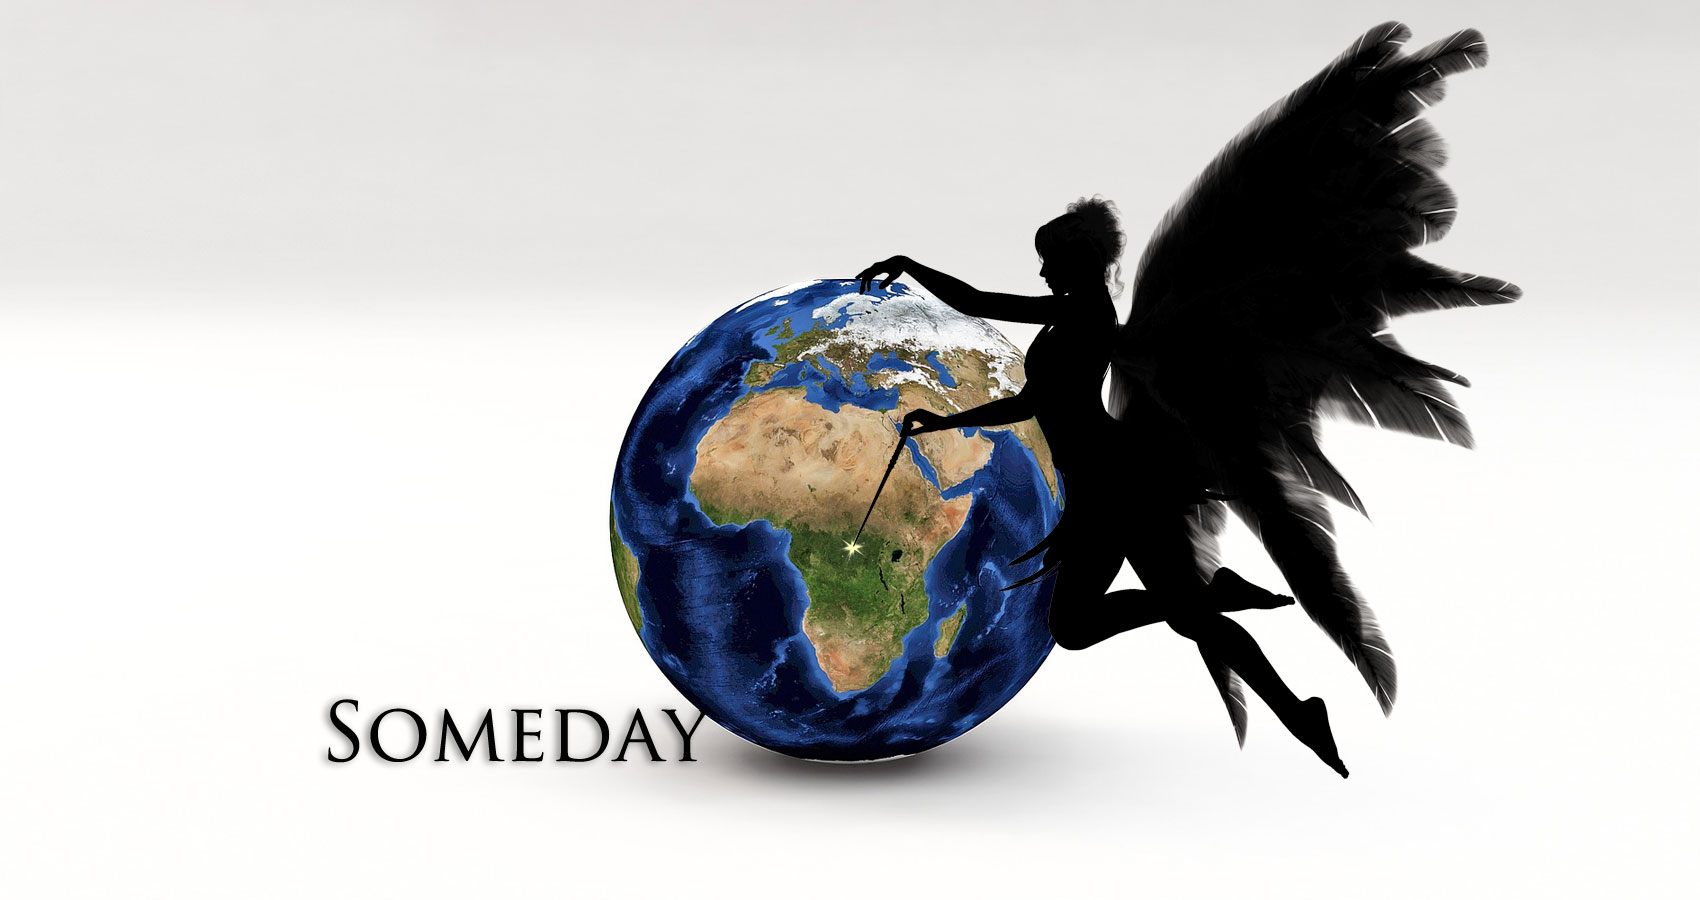 Someday written by Genie Nakano at Spillwords.com